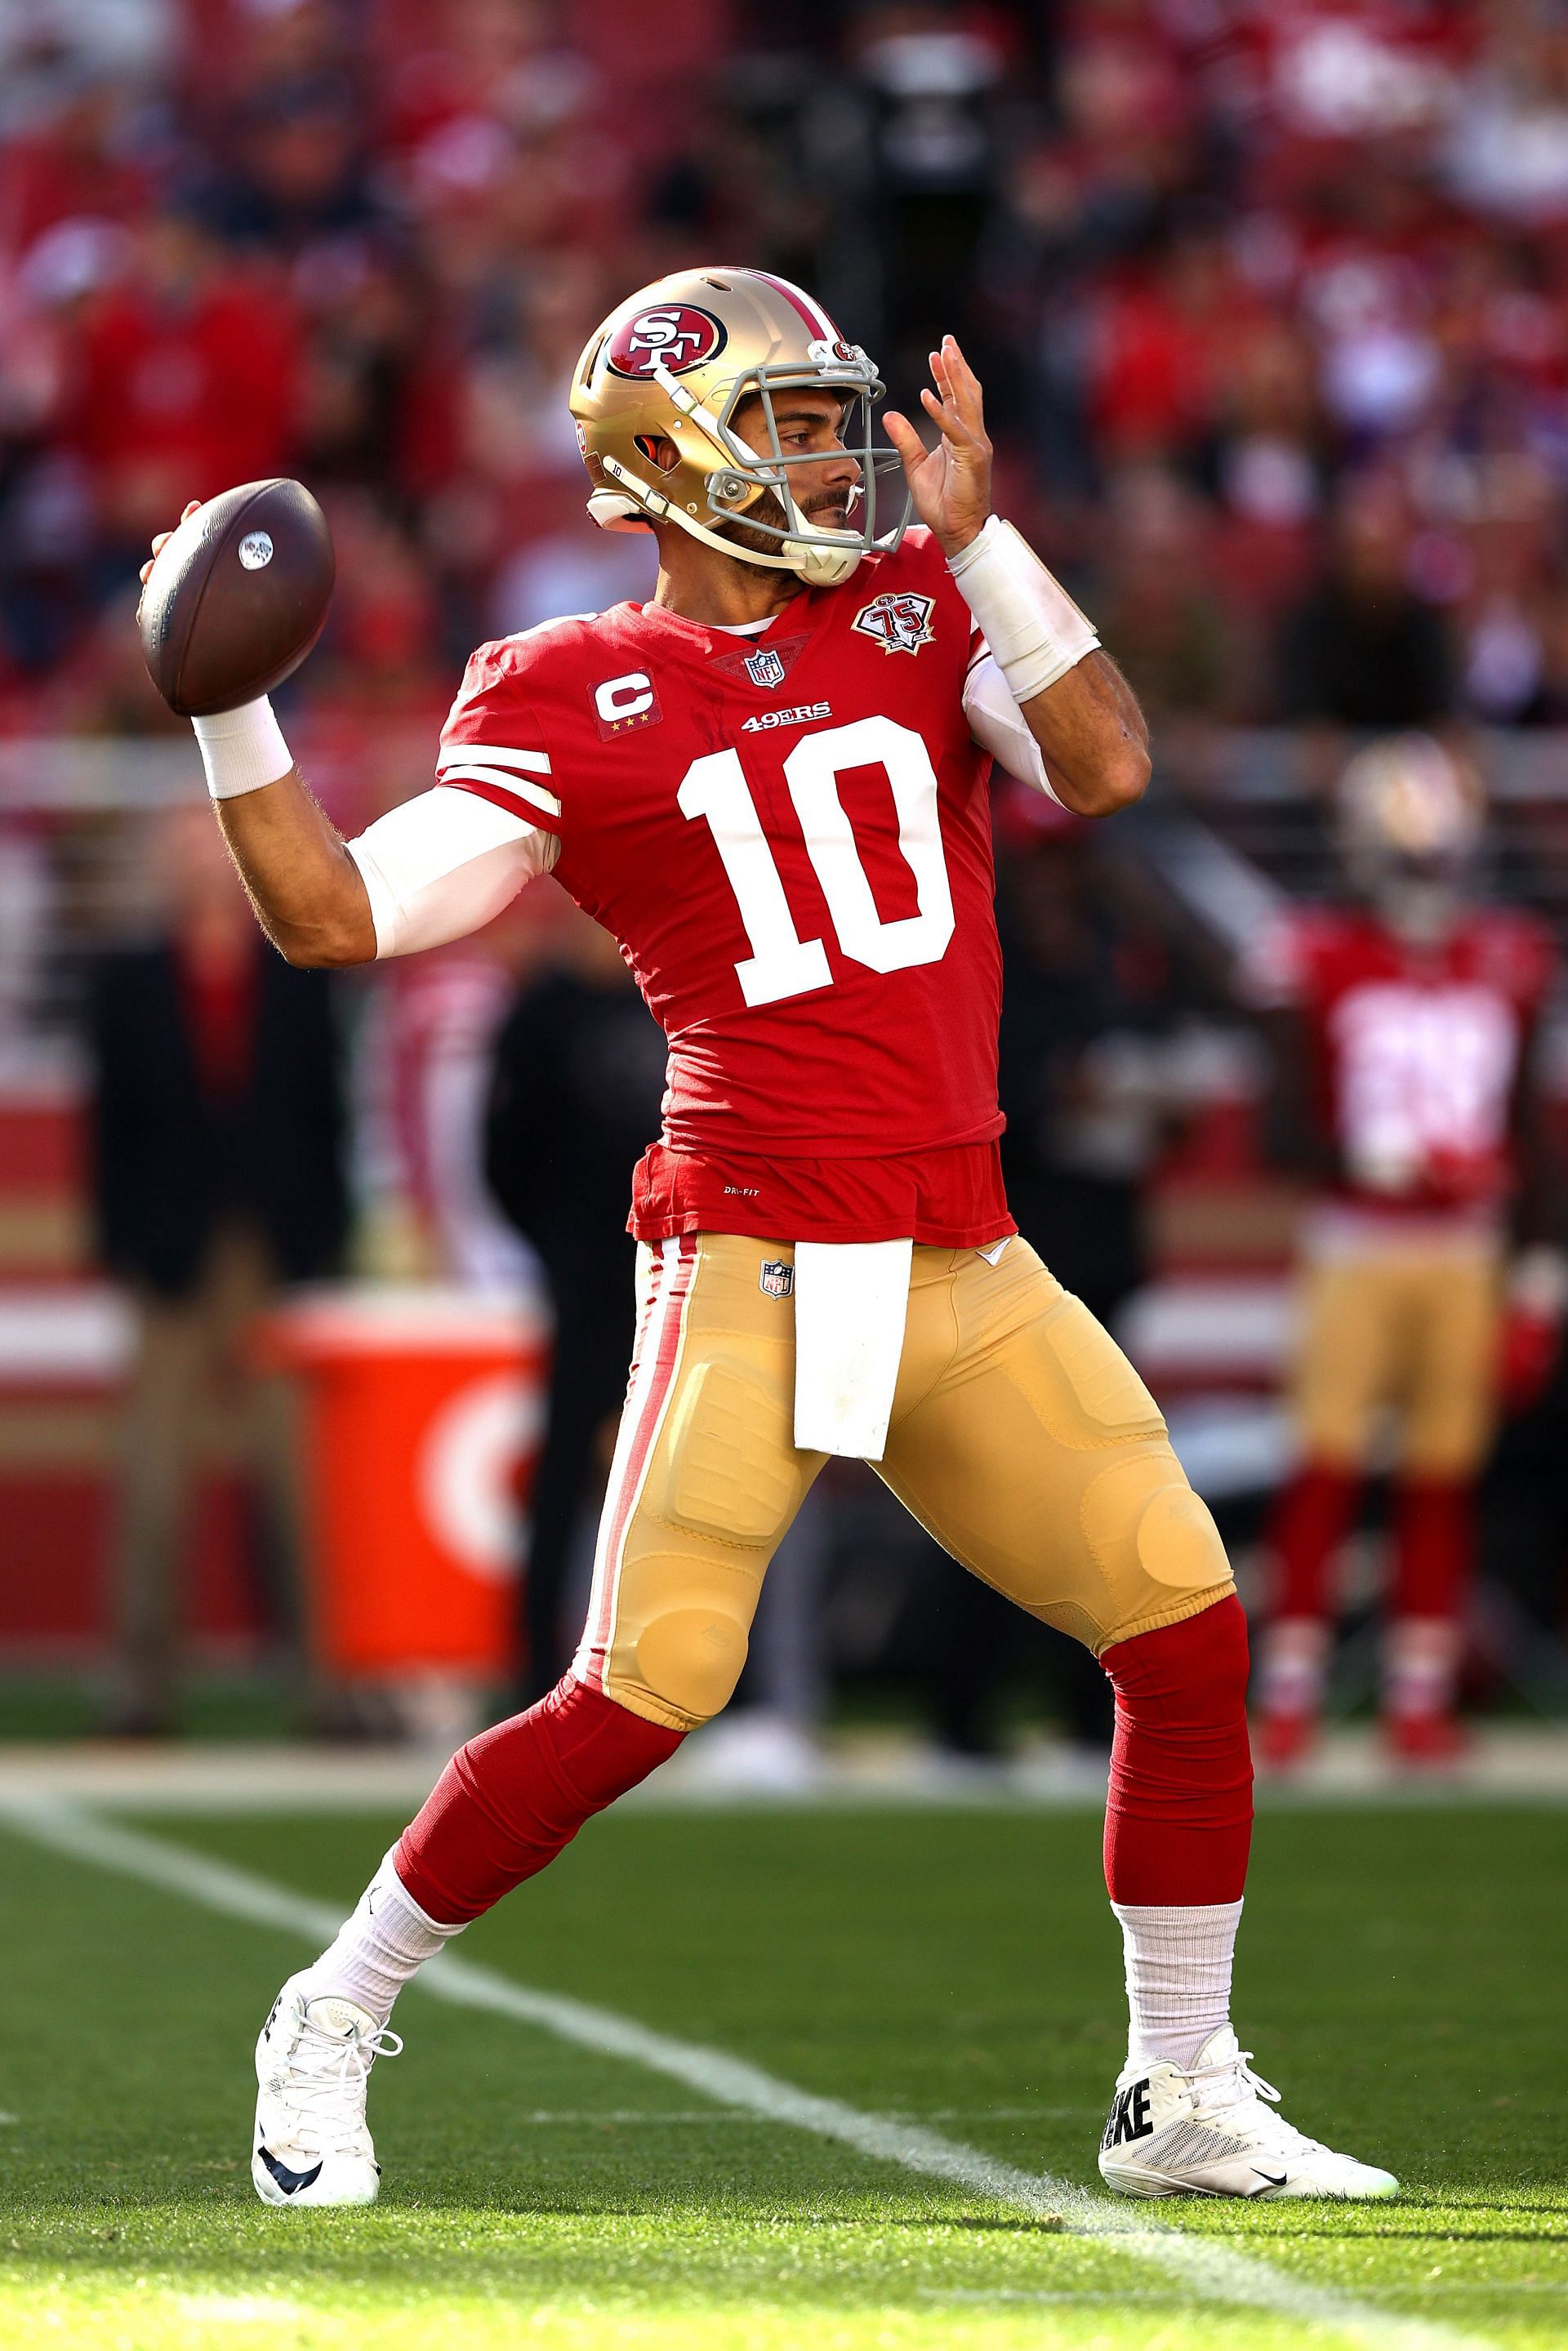 Garoppolo throwing a pass in the pocket for the San Francisco 49ers